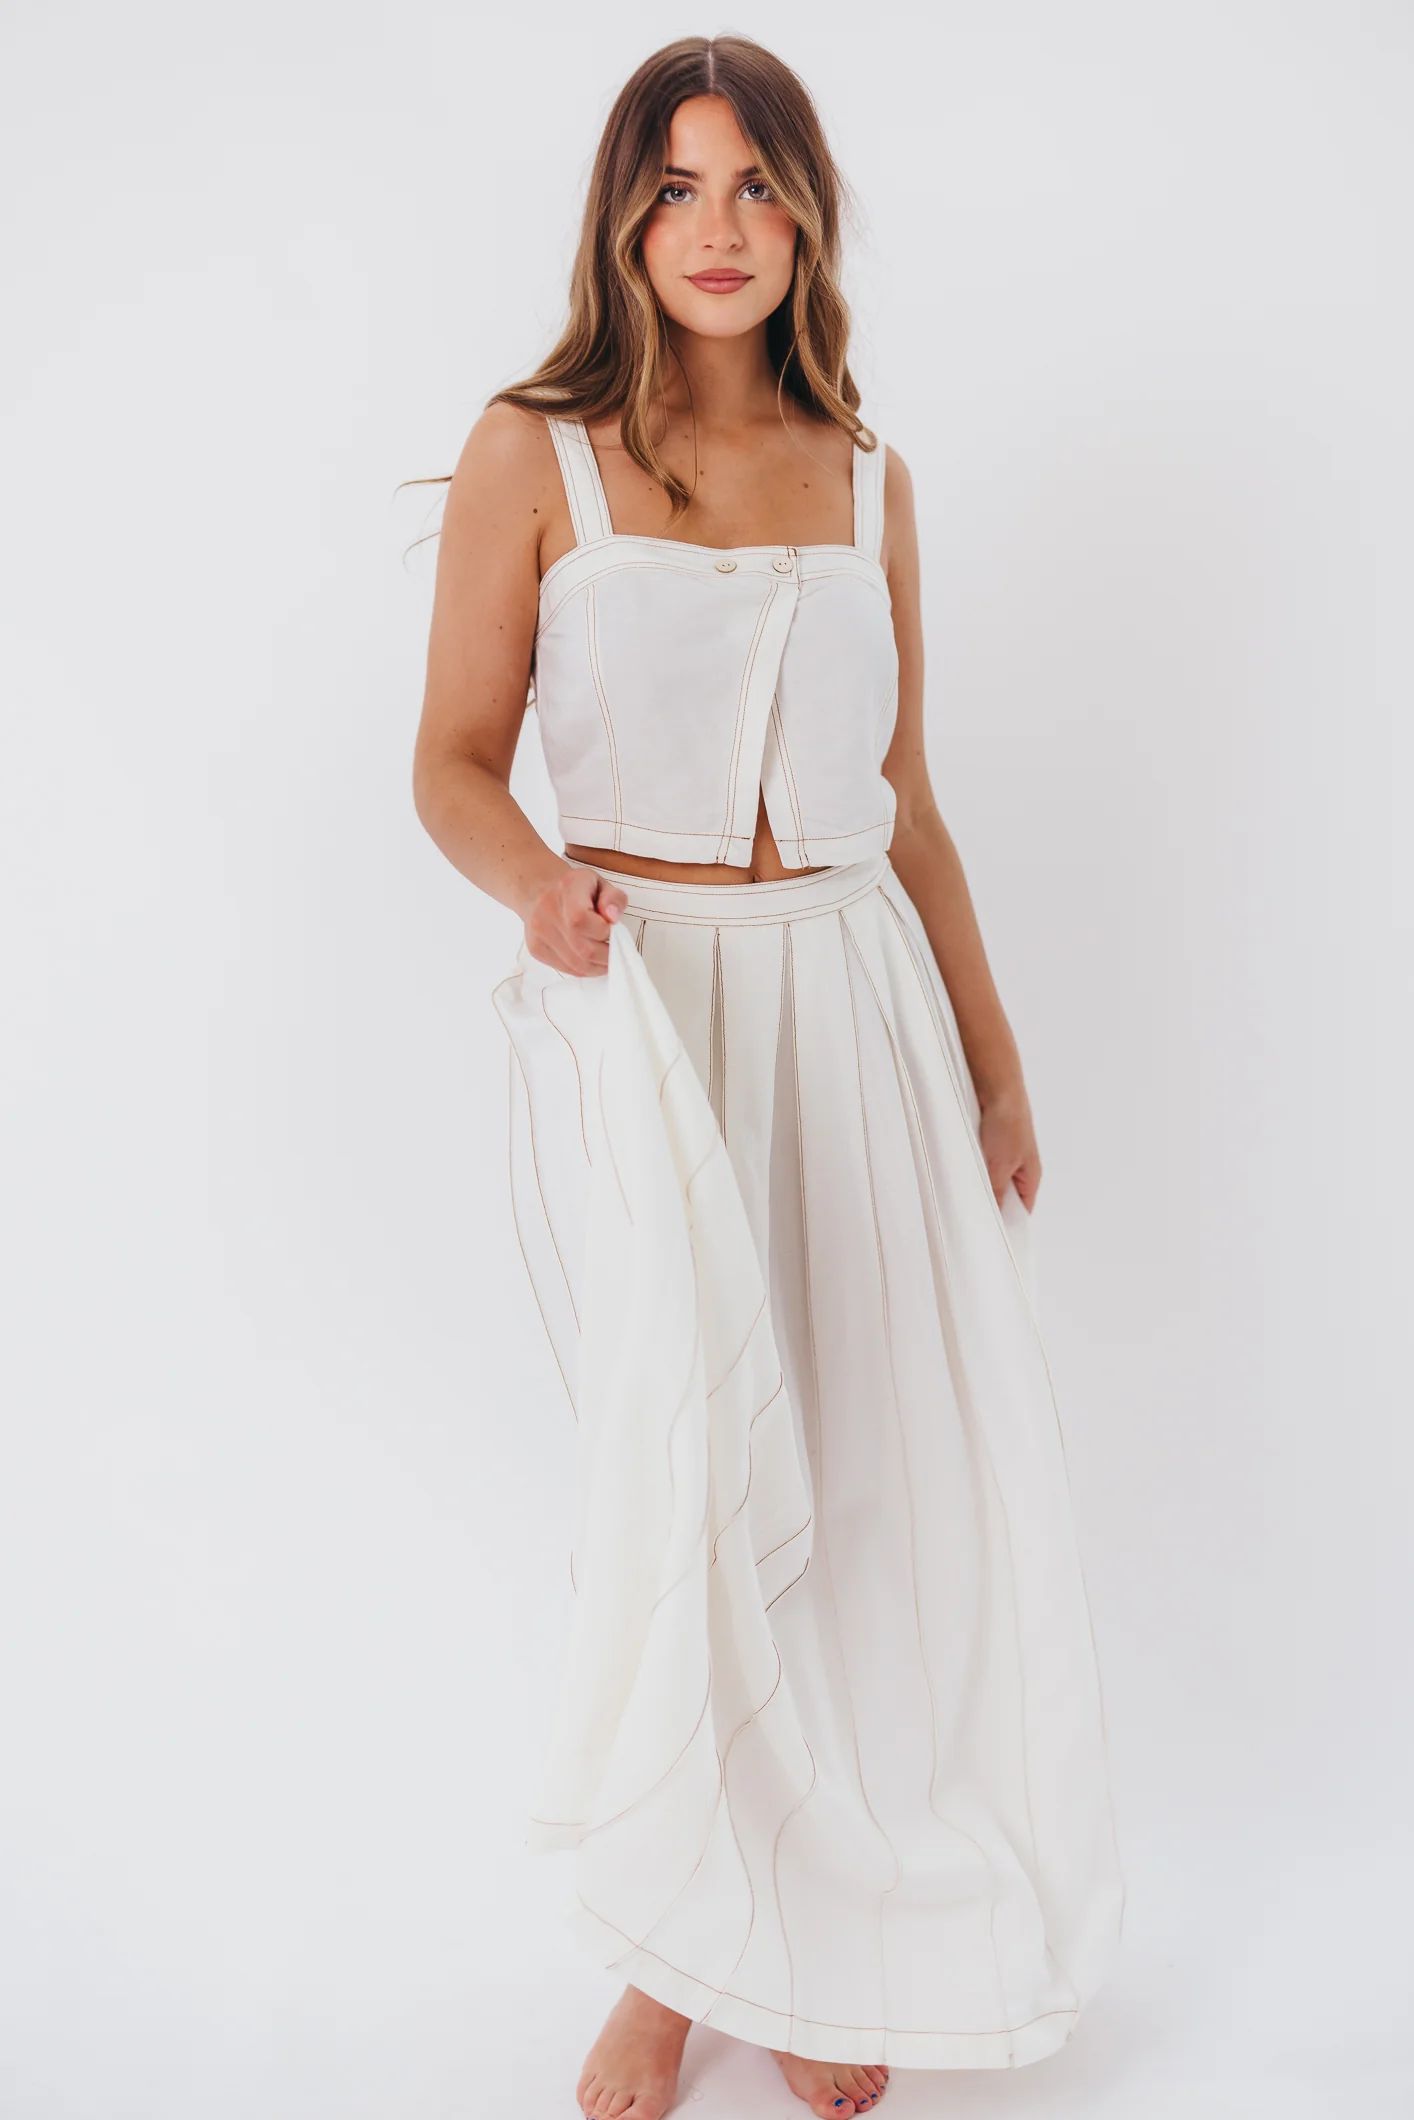 Nicole Linen Top and Maxi Skirt Set in Cream | Worth Collective